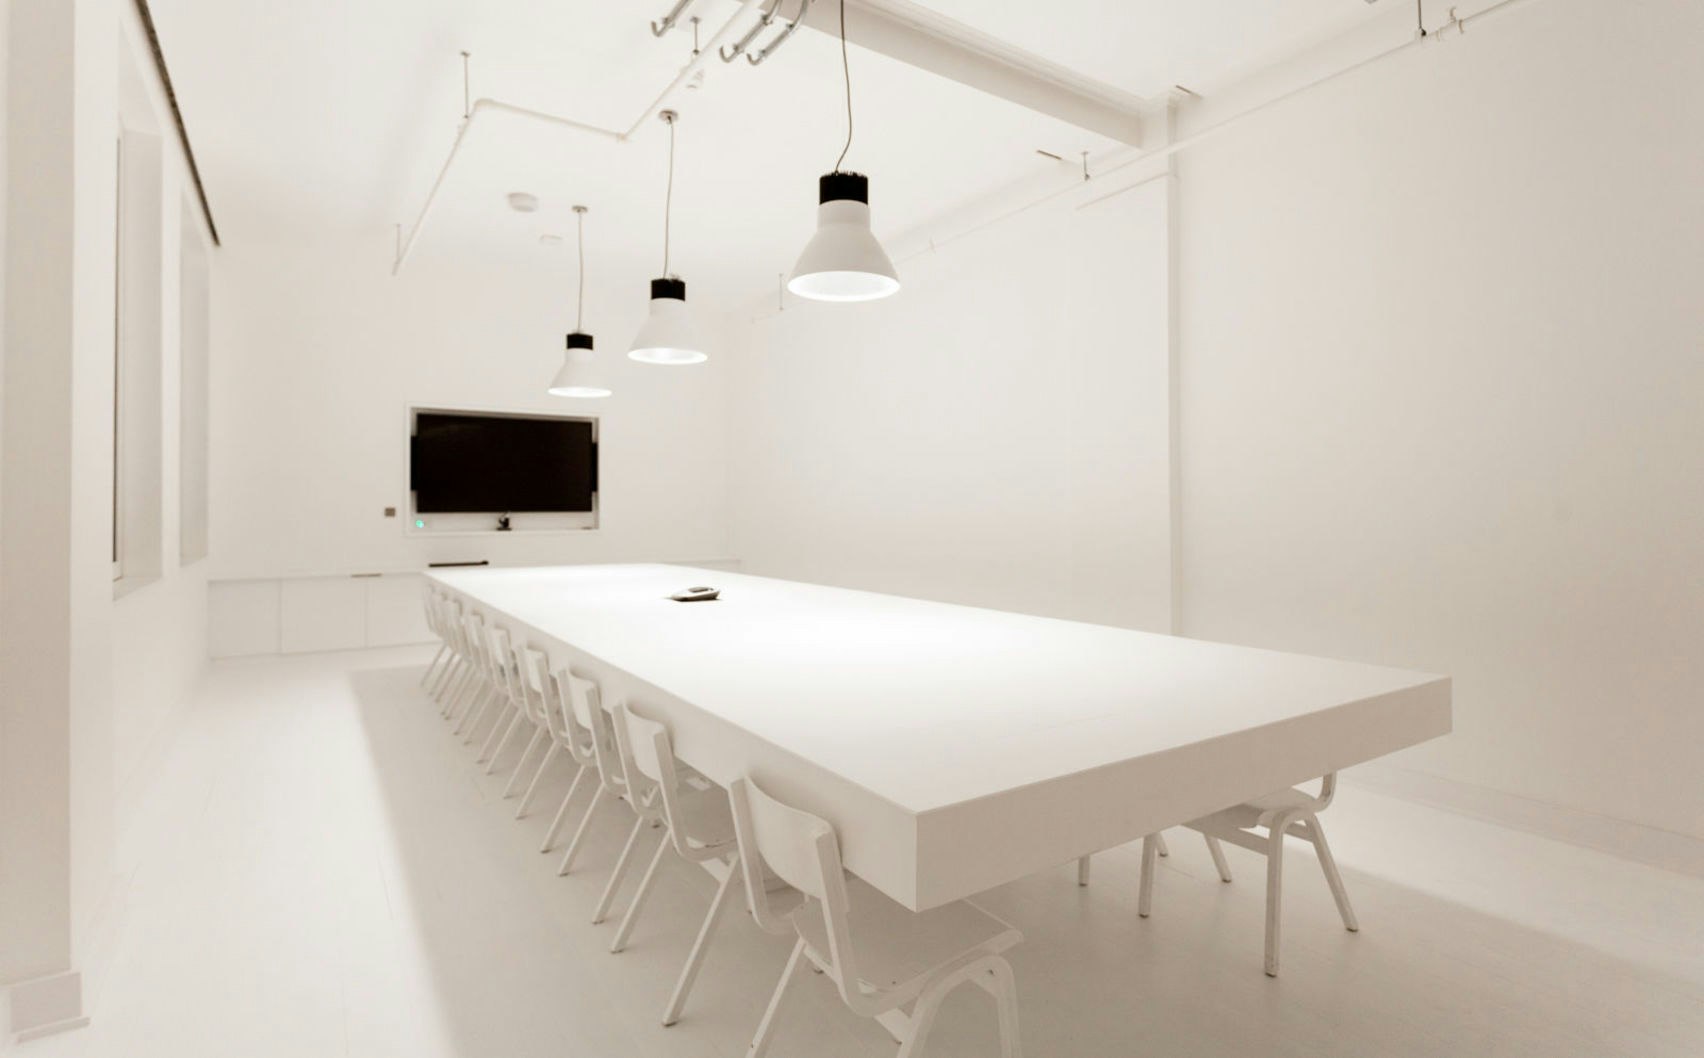 Huckletree Shoreditch - Cupertino Meeting Room image 1